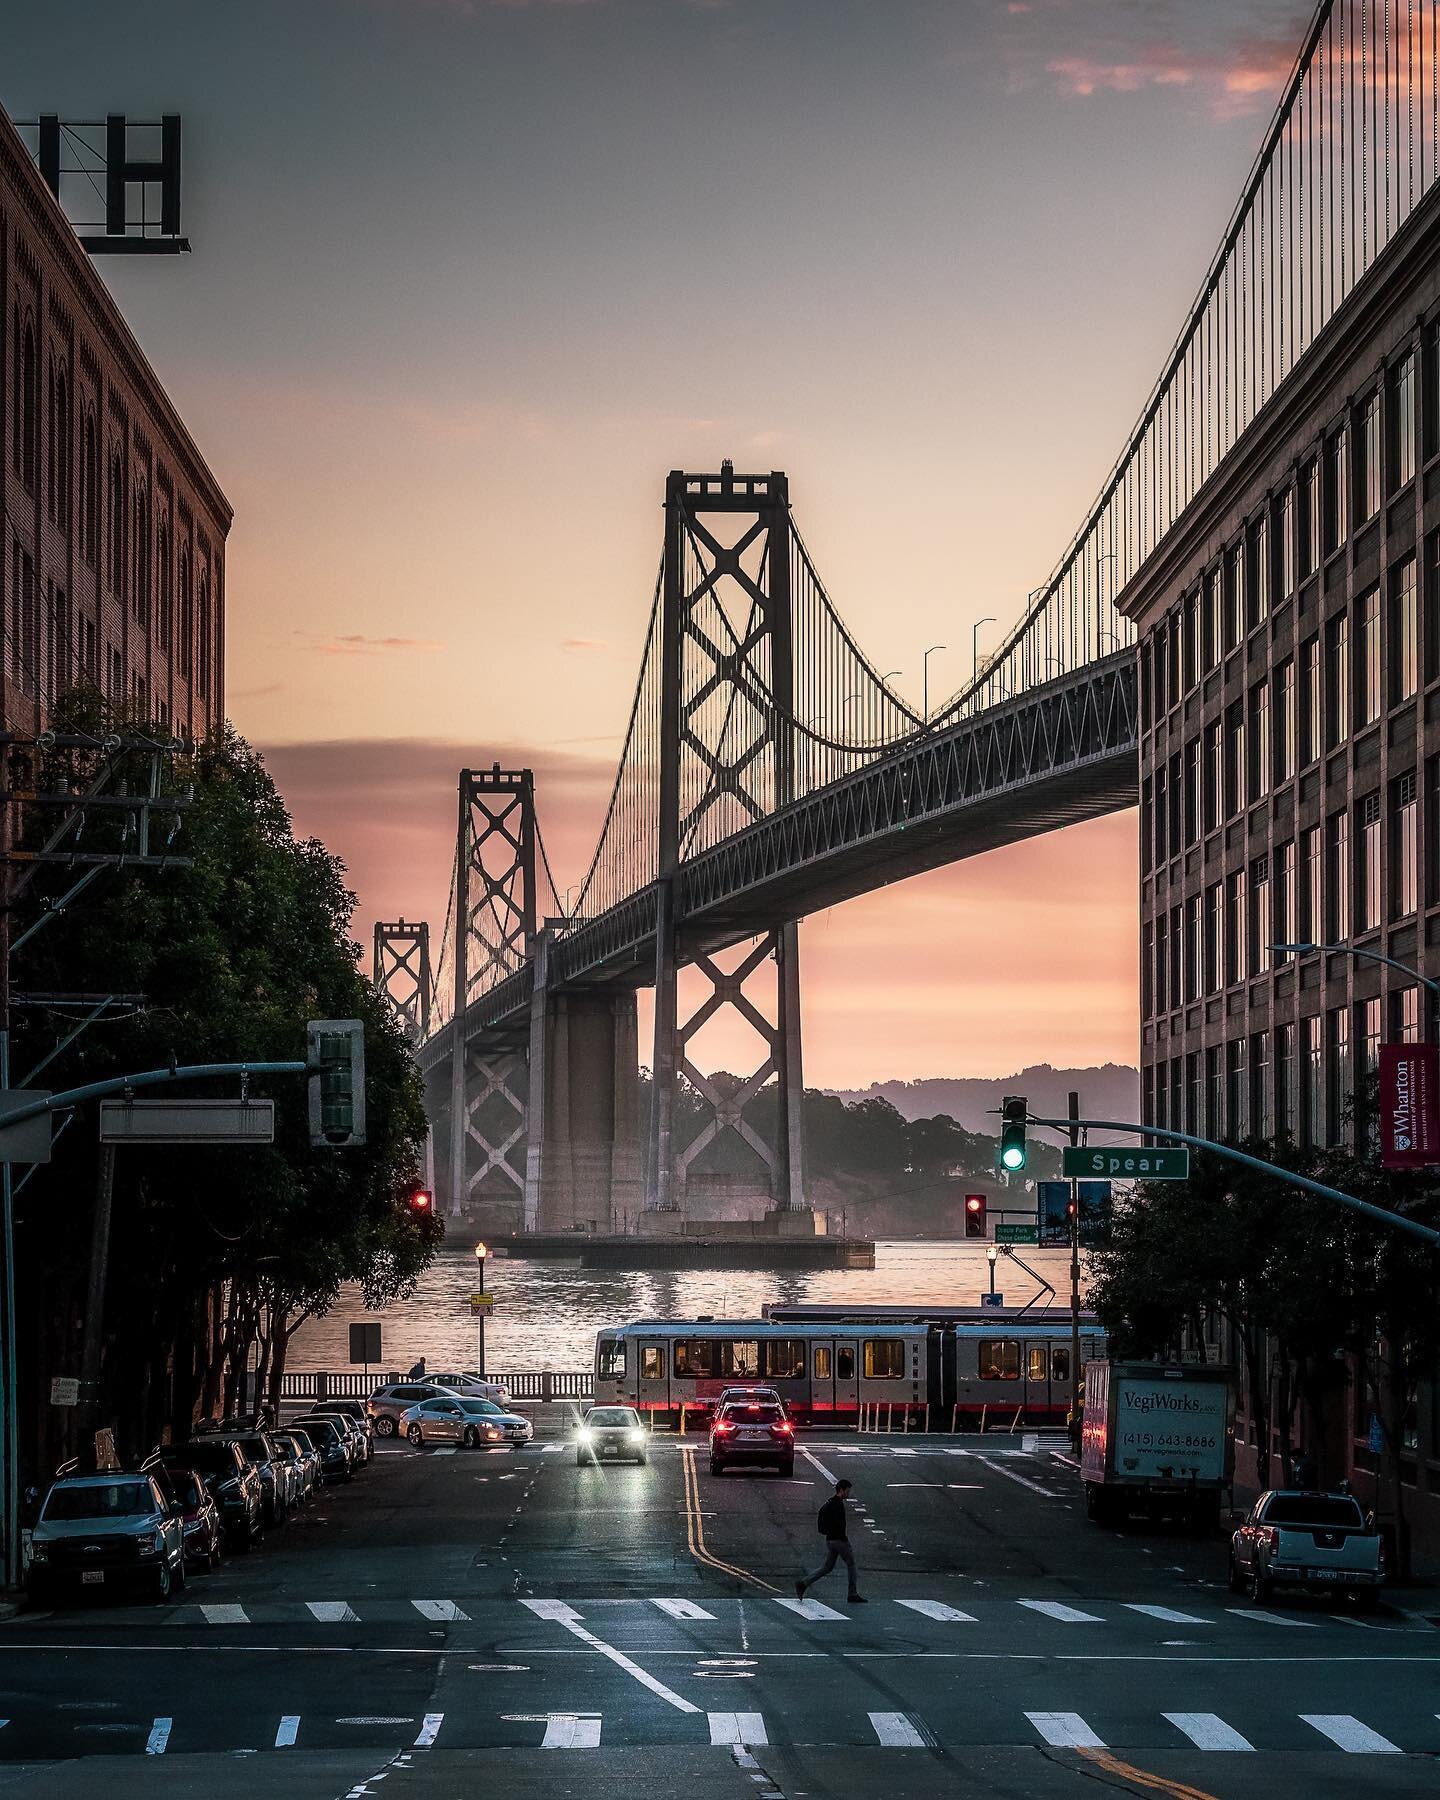 Do what you can.  With what you have.  Where you are. -tr
.
.
.
.

#street_life_mood 
#agameoftones 
#bay_shooters 
#streetsofsf 
#wildbayarea 
#creativeoptic 
#heatercentral 
#all2epic 
#urbanromantix 
#shotzdelight 
#artofvisuals 
#urbanandstreet 
